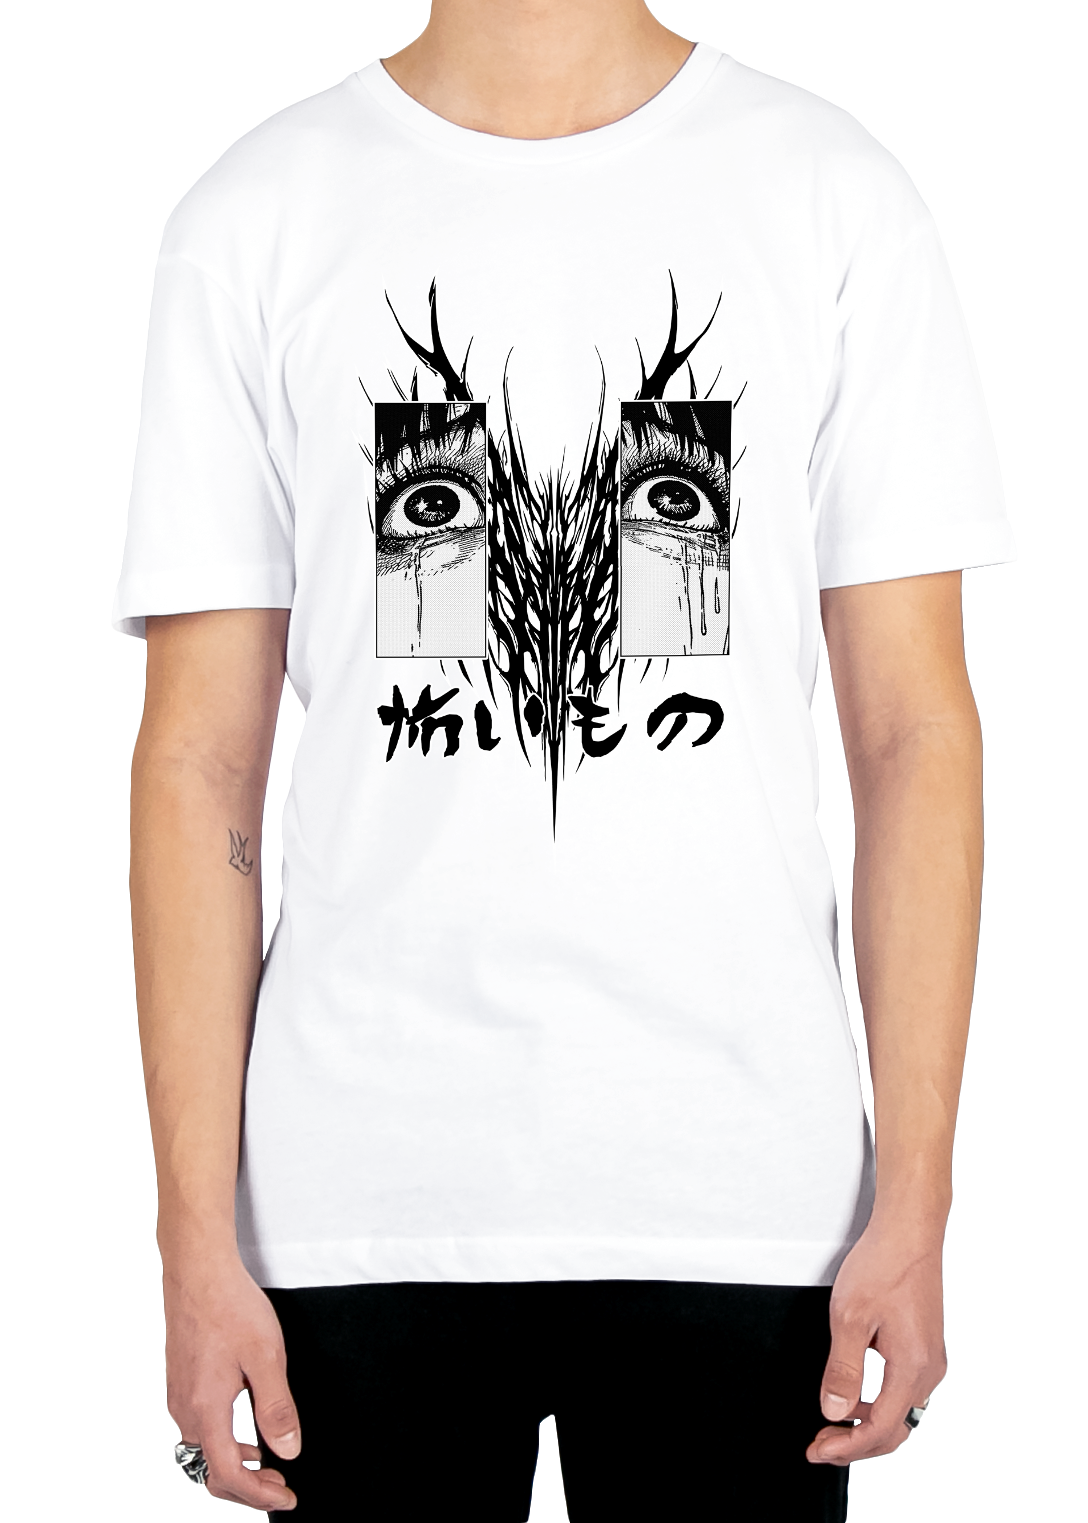 Scary Thing Tee